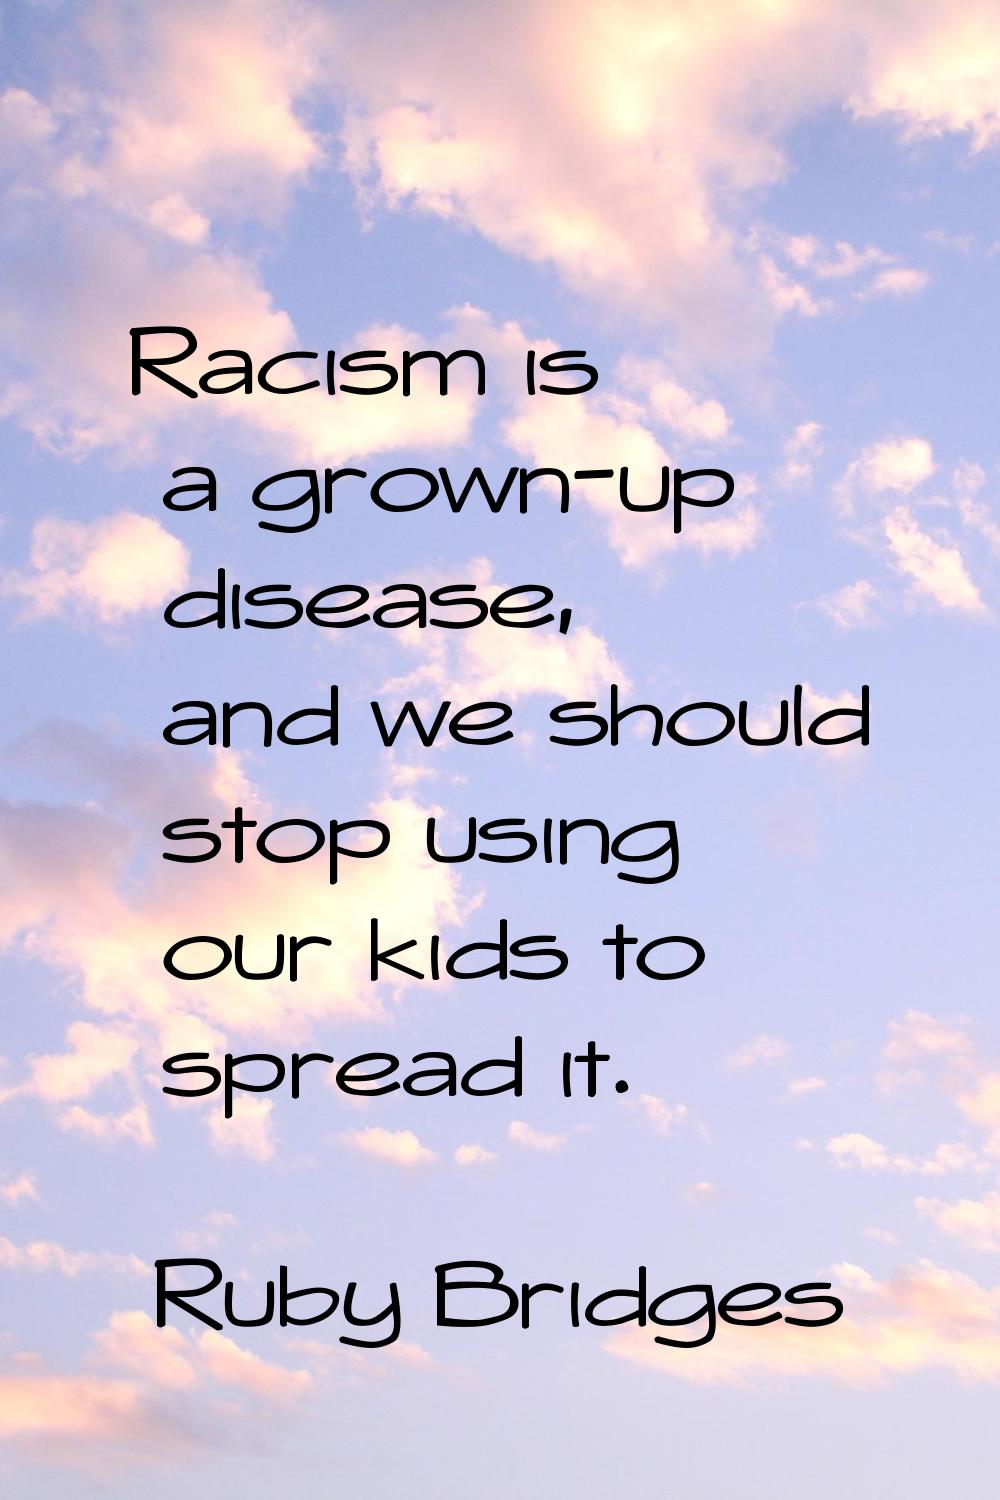 Racism is a grown-up disease, and we should stop using our kids to spread it.